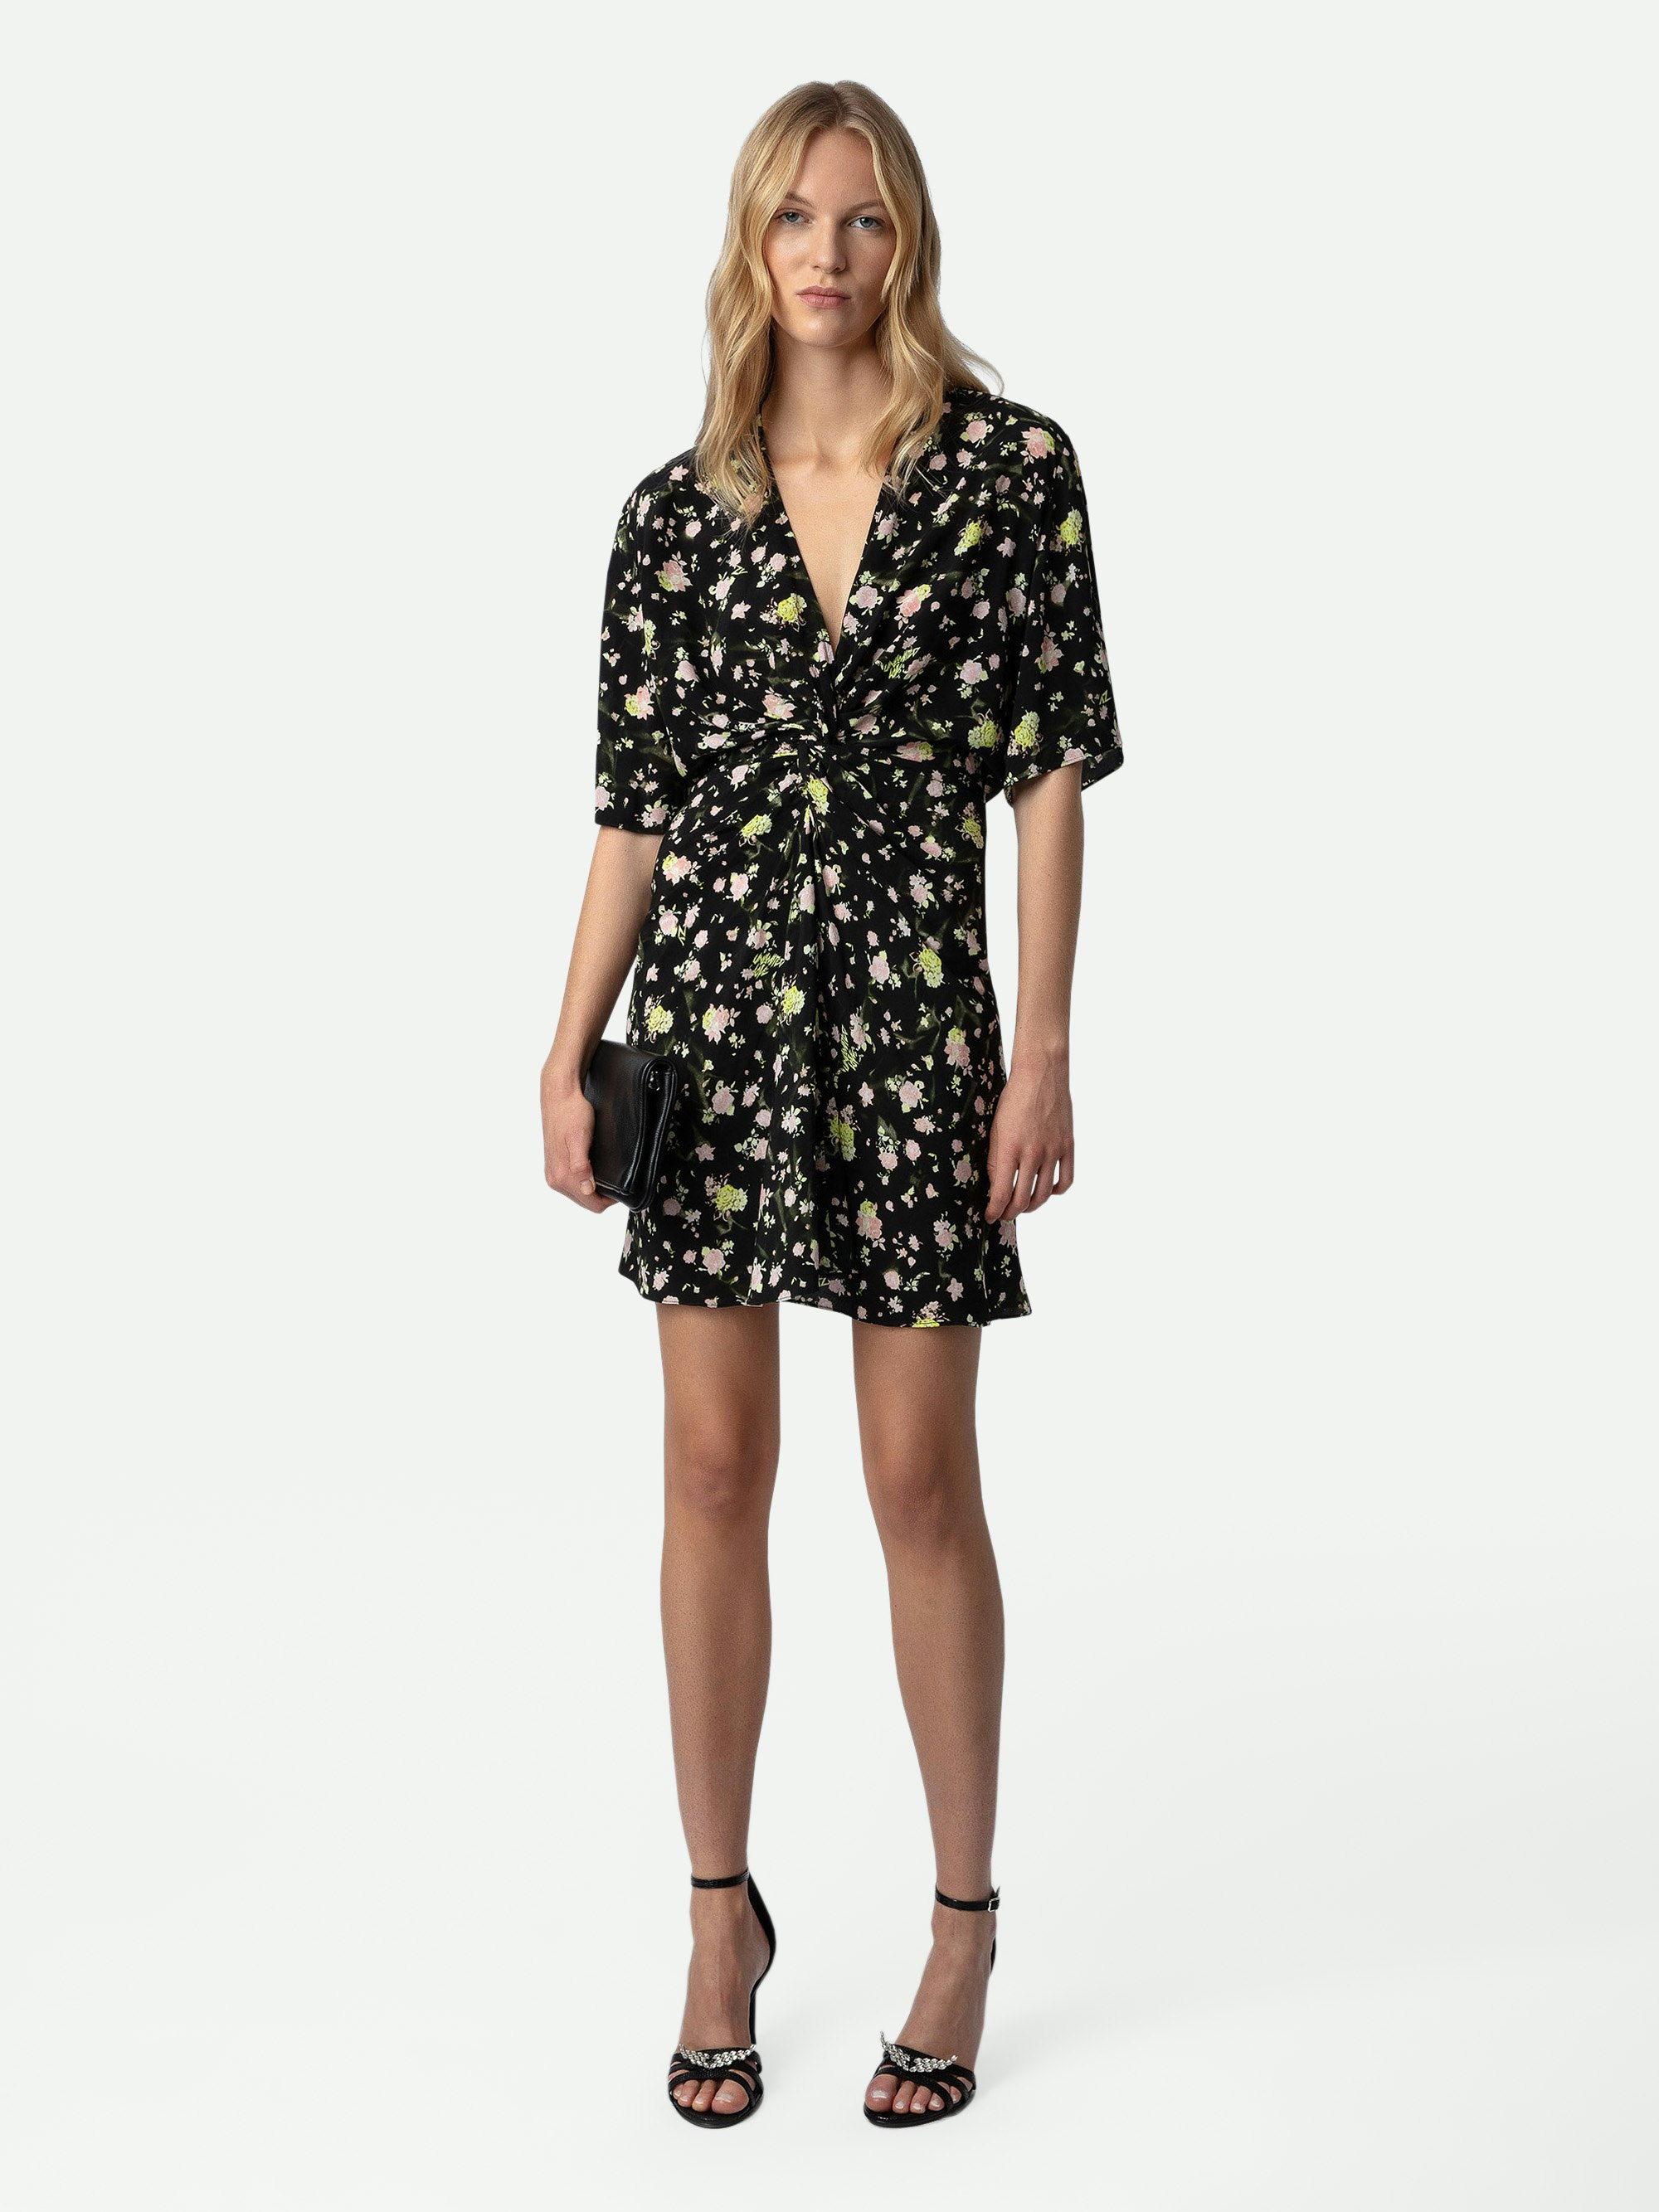 Rozom Soft Crinkle Roses Dress - Women’s black floral-print silk dress with knot and draping at the waist.